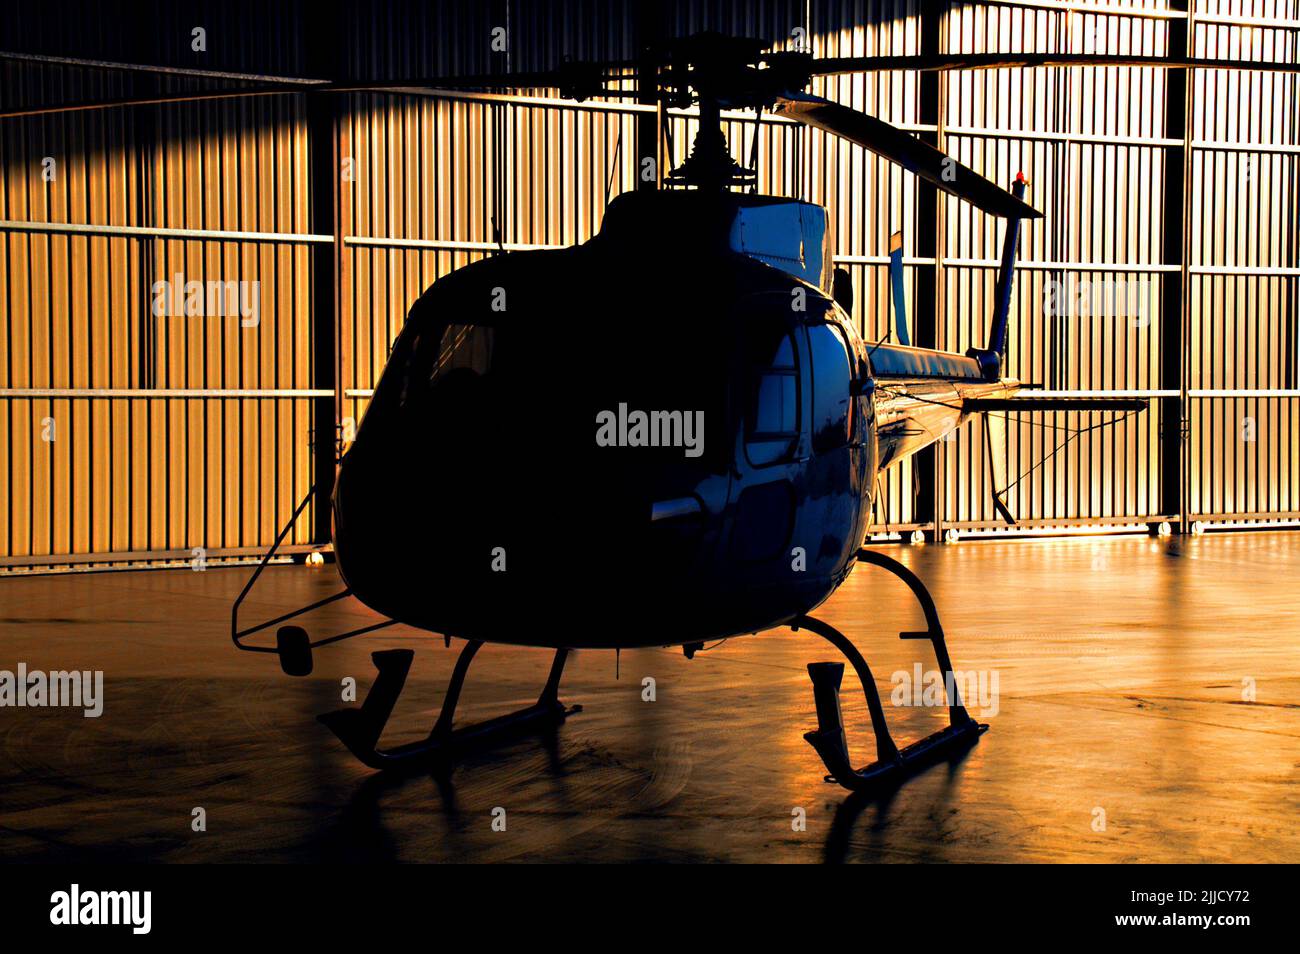 Eurocopter AS350 Squirrel helicopter Stock Photo